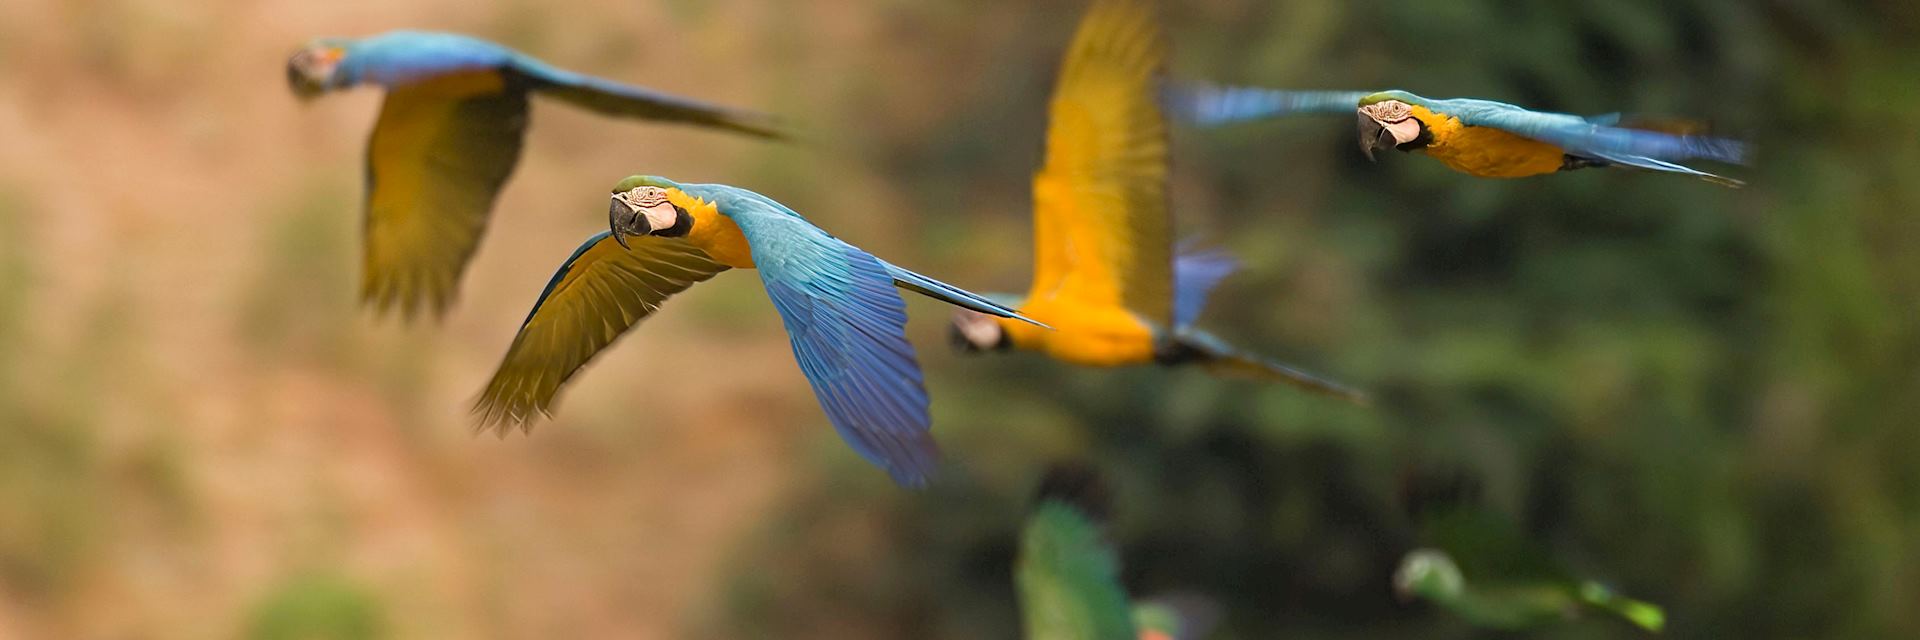 Macaws and parrots